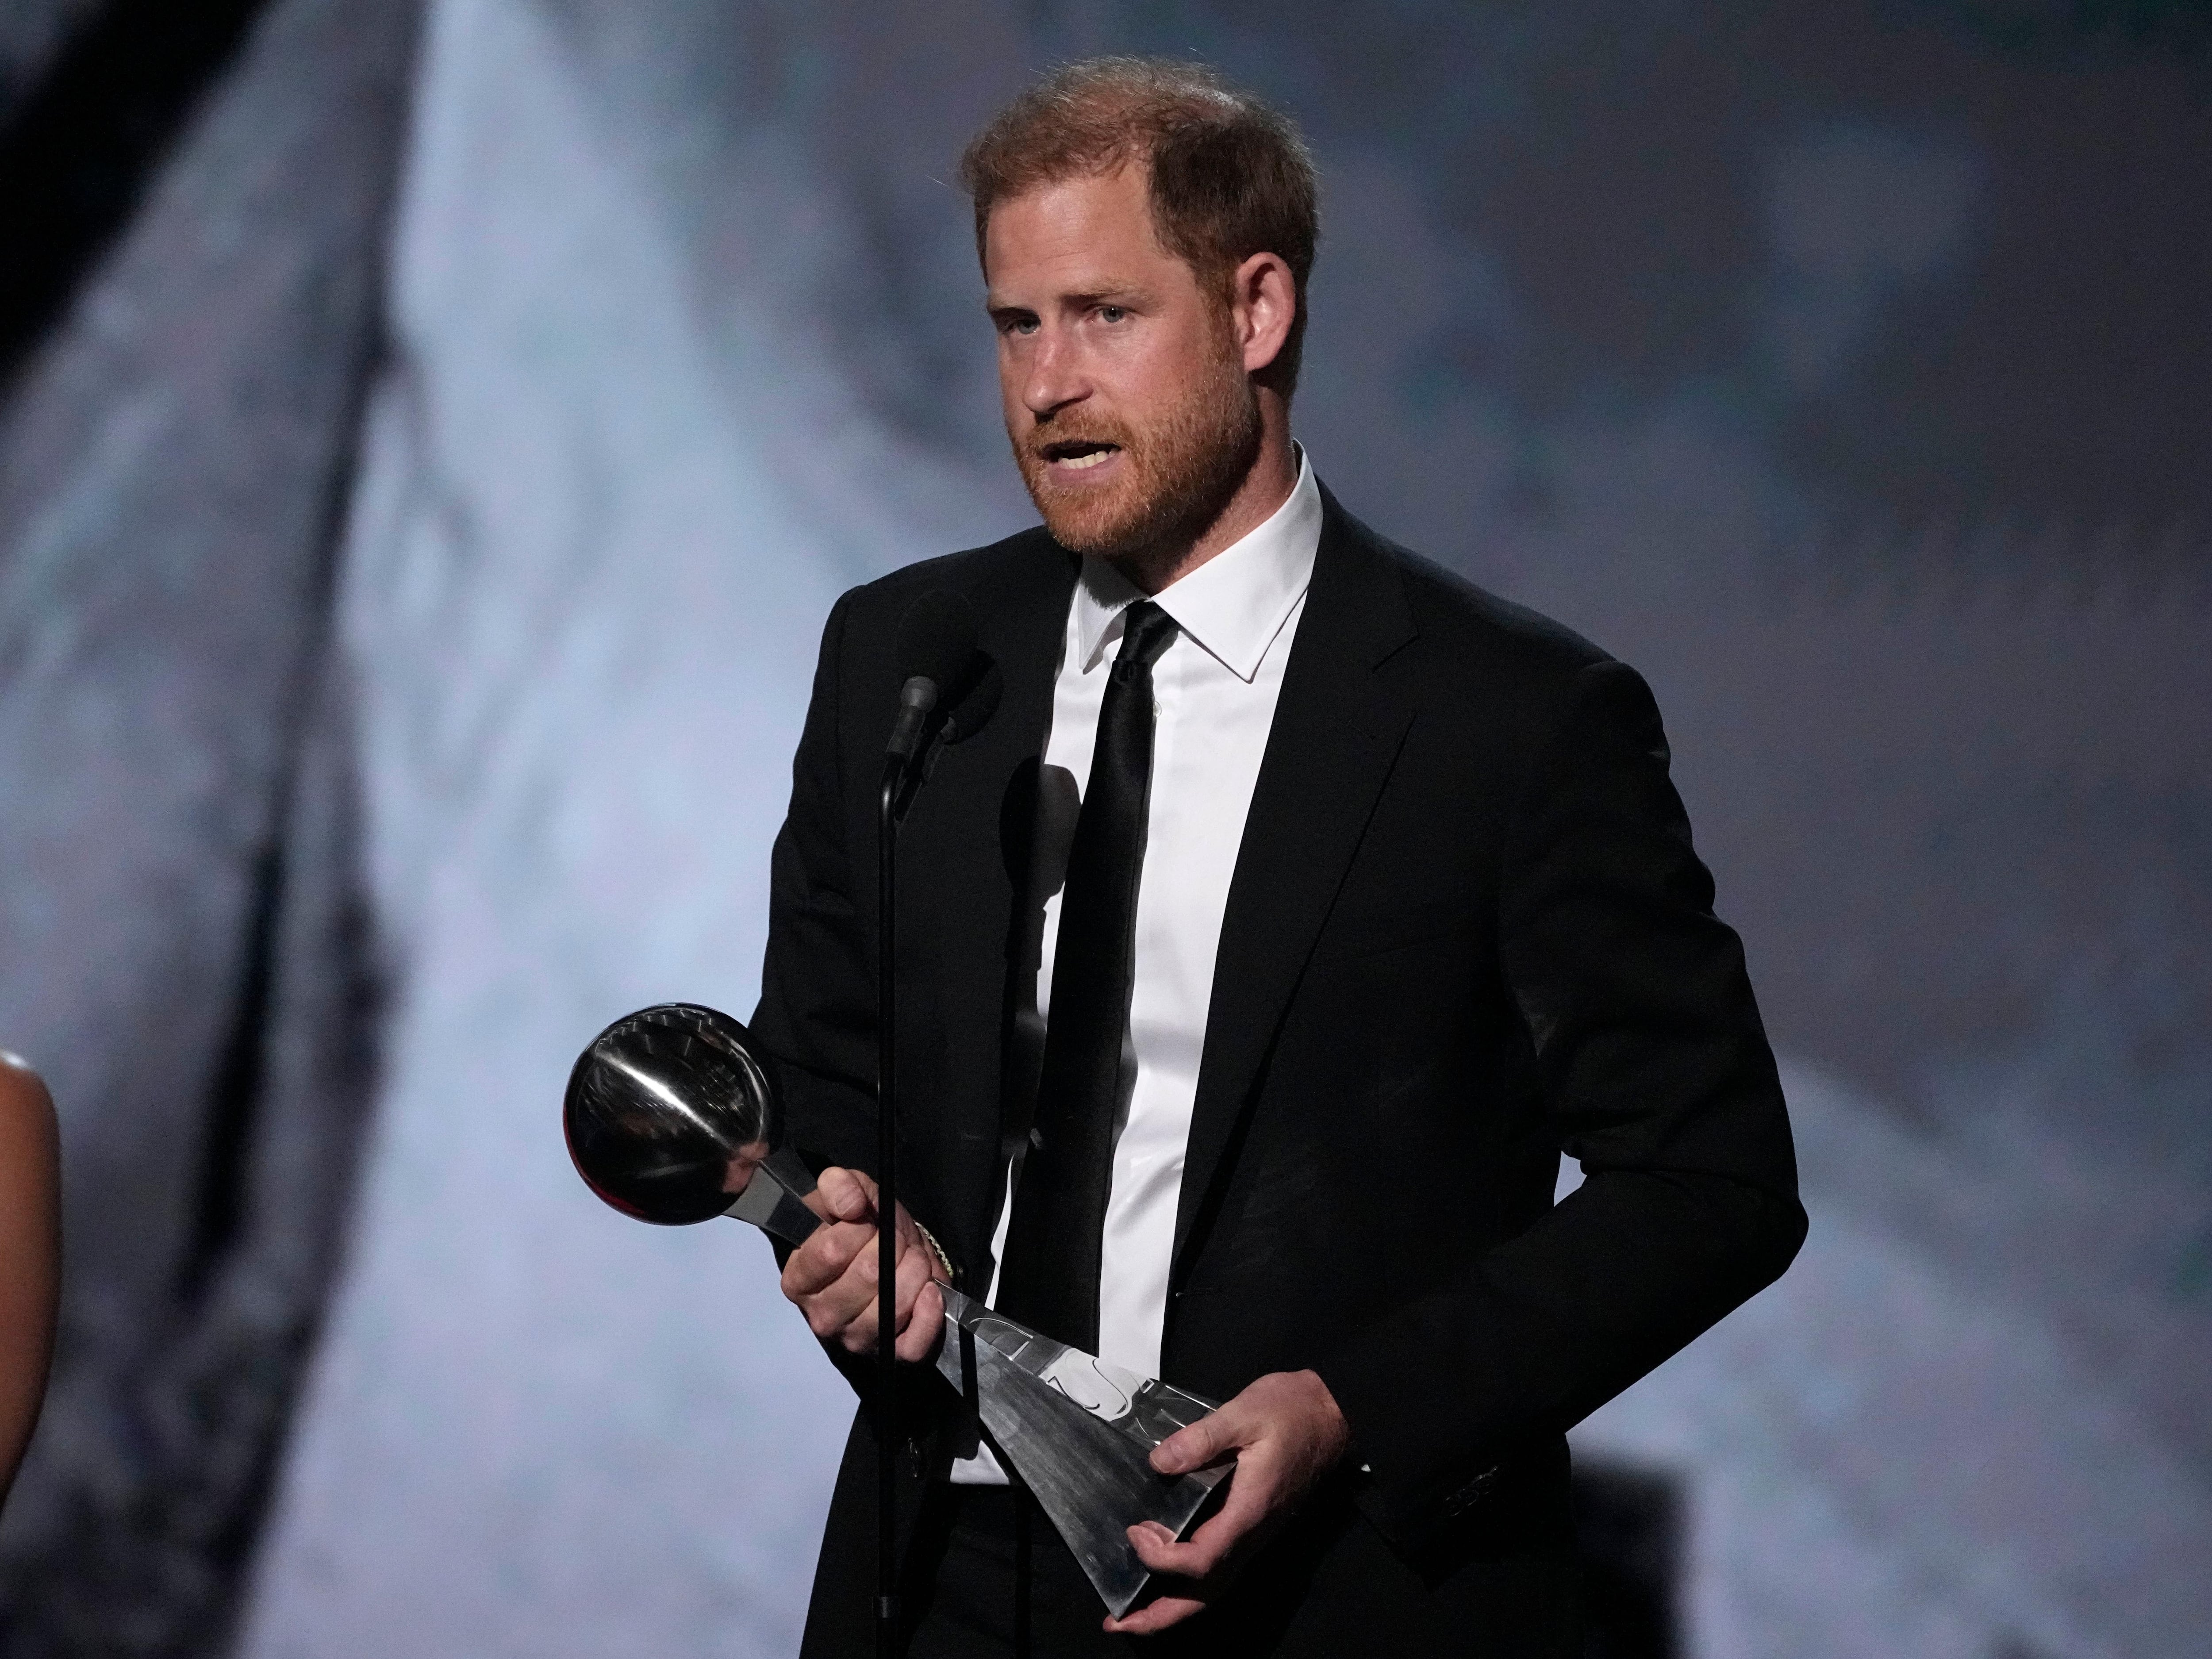 Harry nods to ‘eternal bond’ with Diana while accepting award for Invictus Games